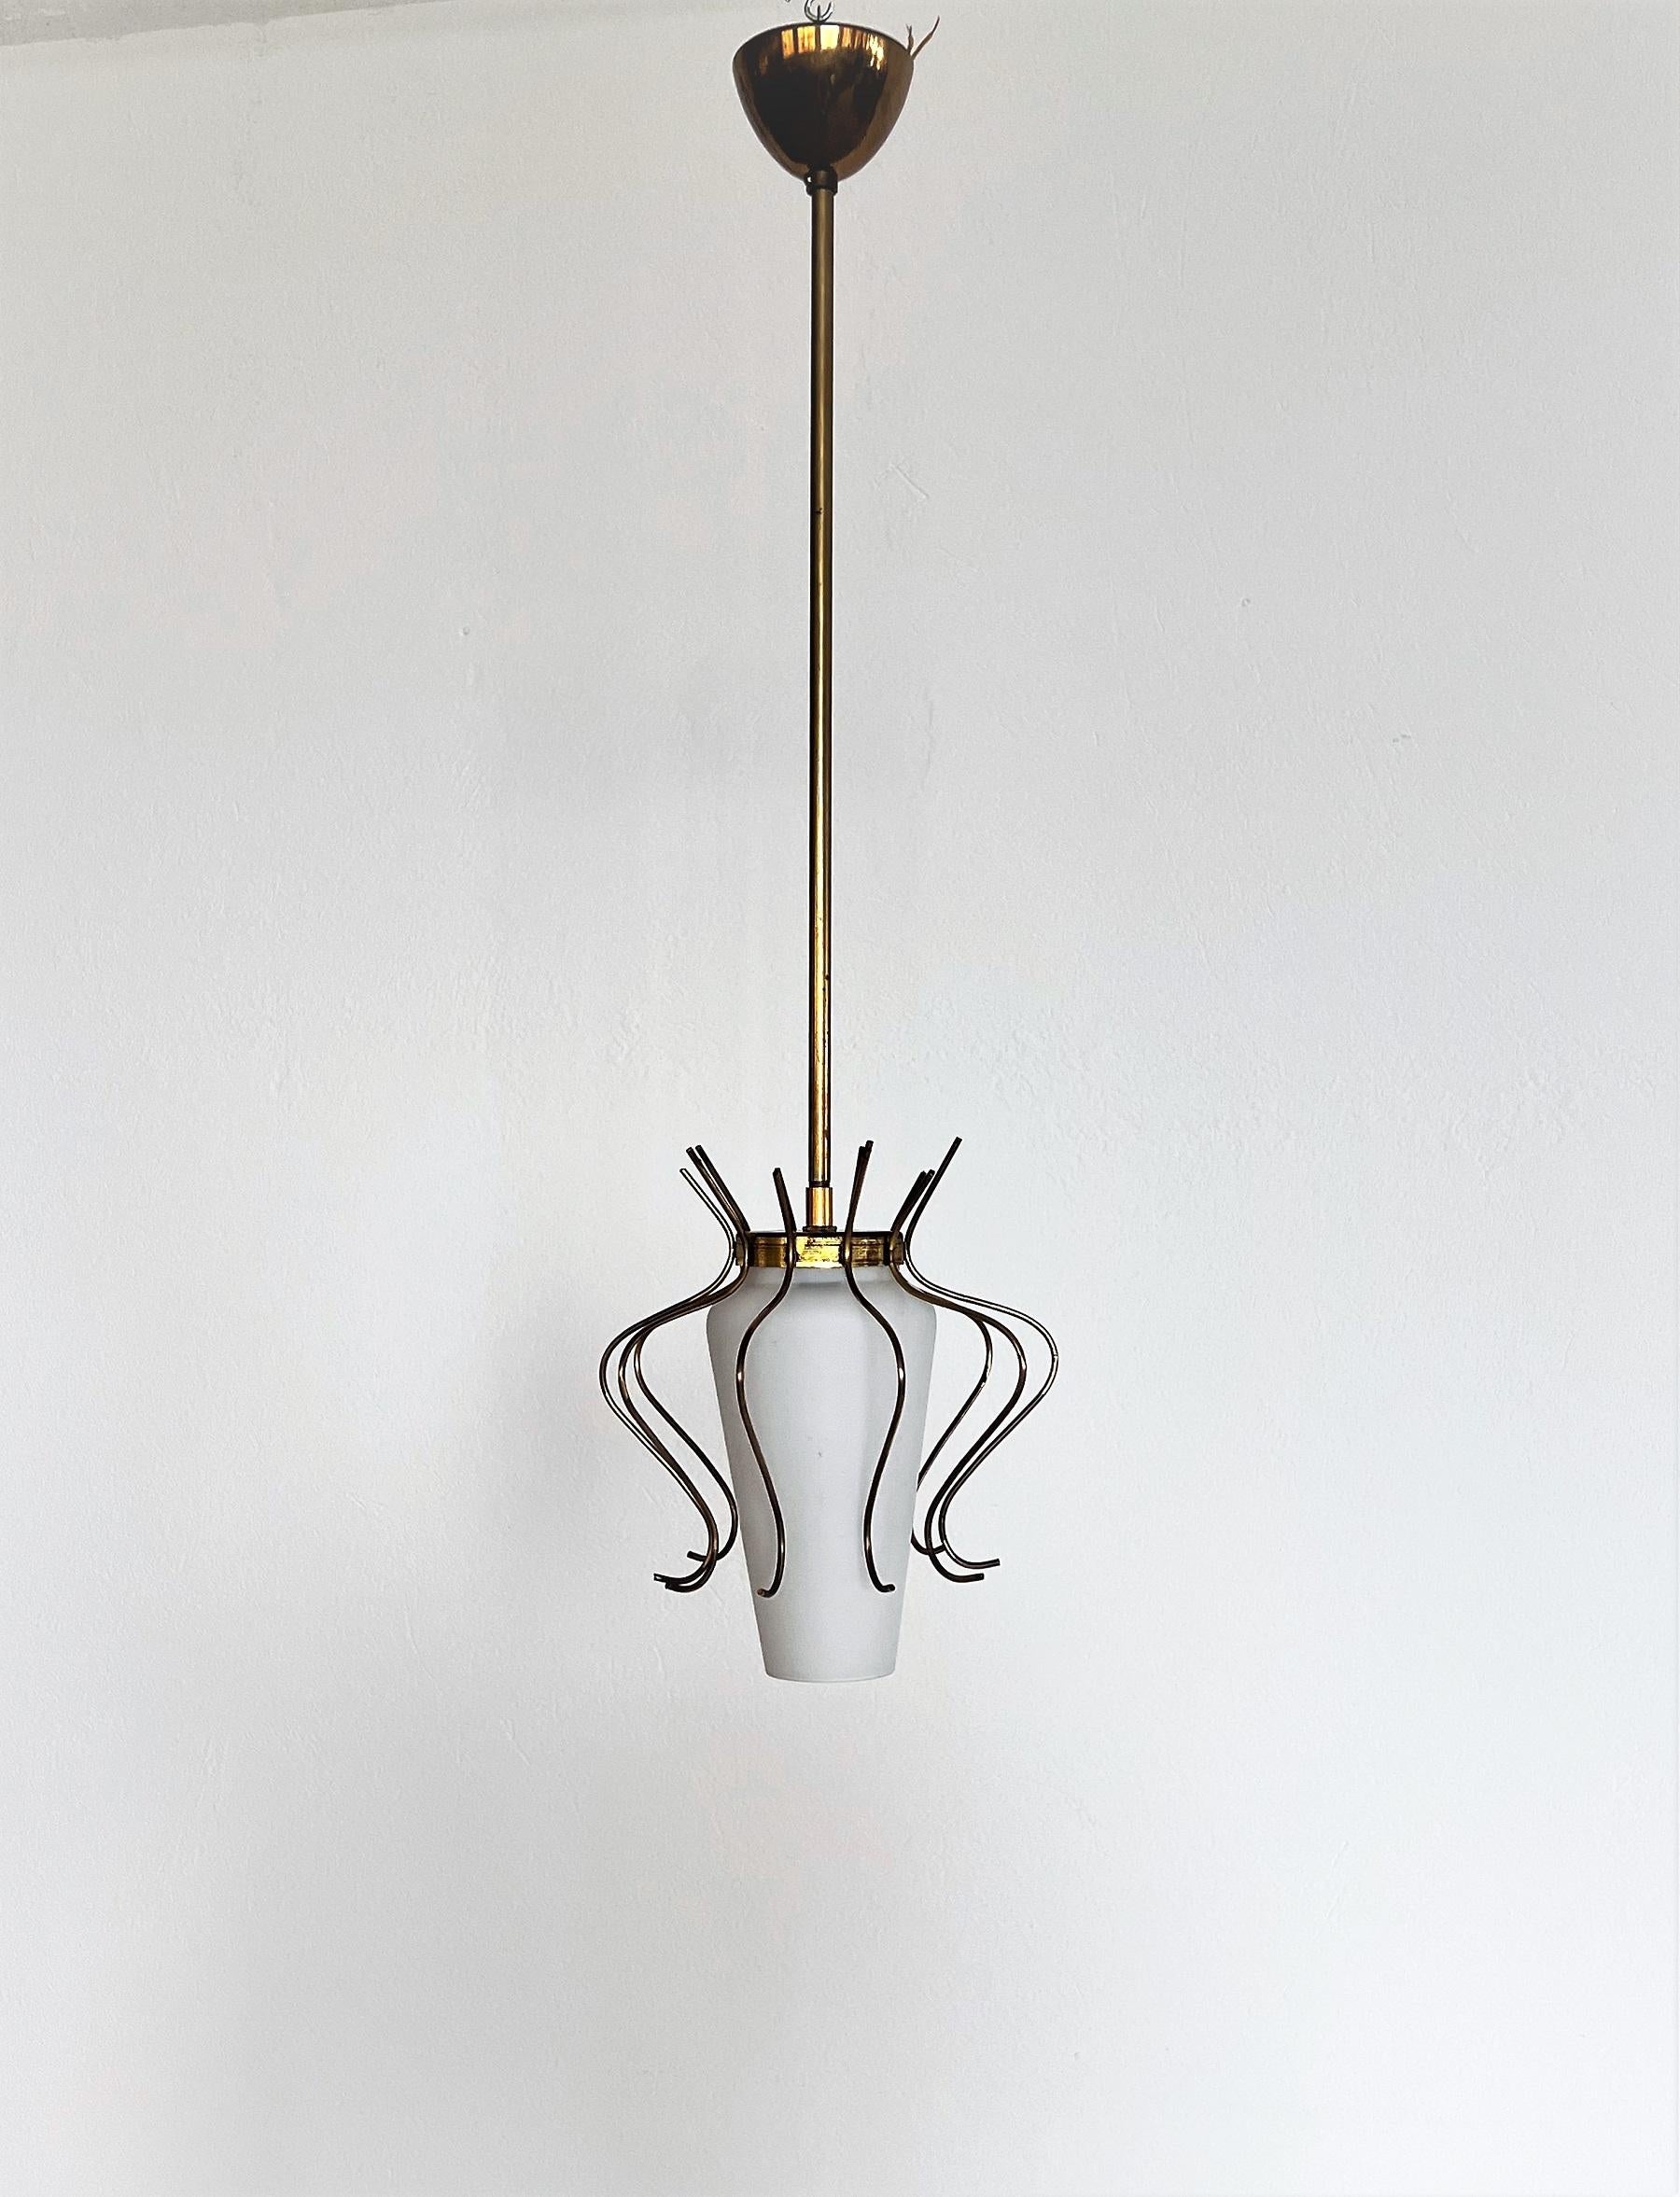 Hand-Crafted Italian Midcentury Pendant Lamp in Opaline Glass with Brass Details, 1950s